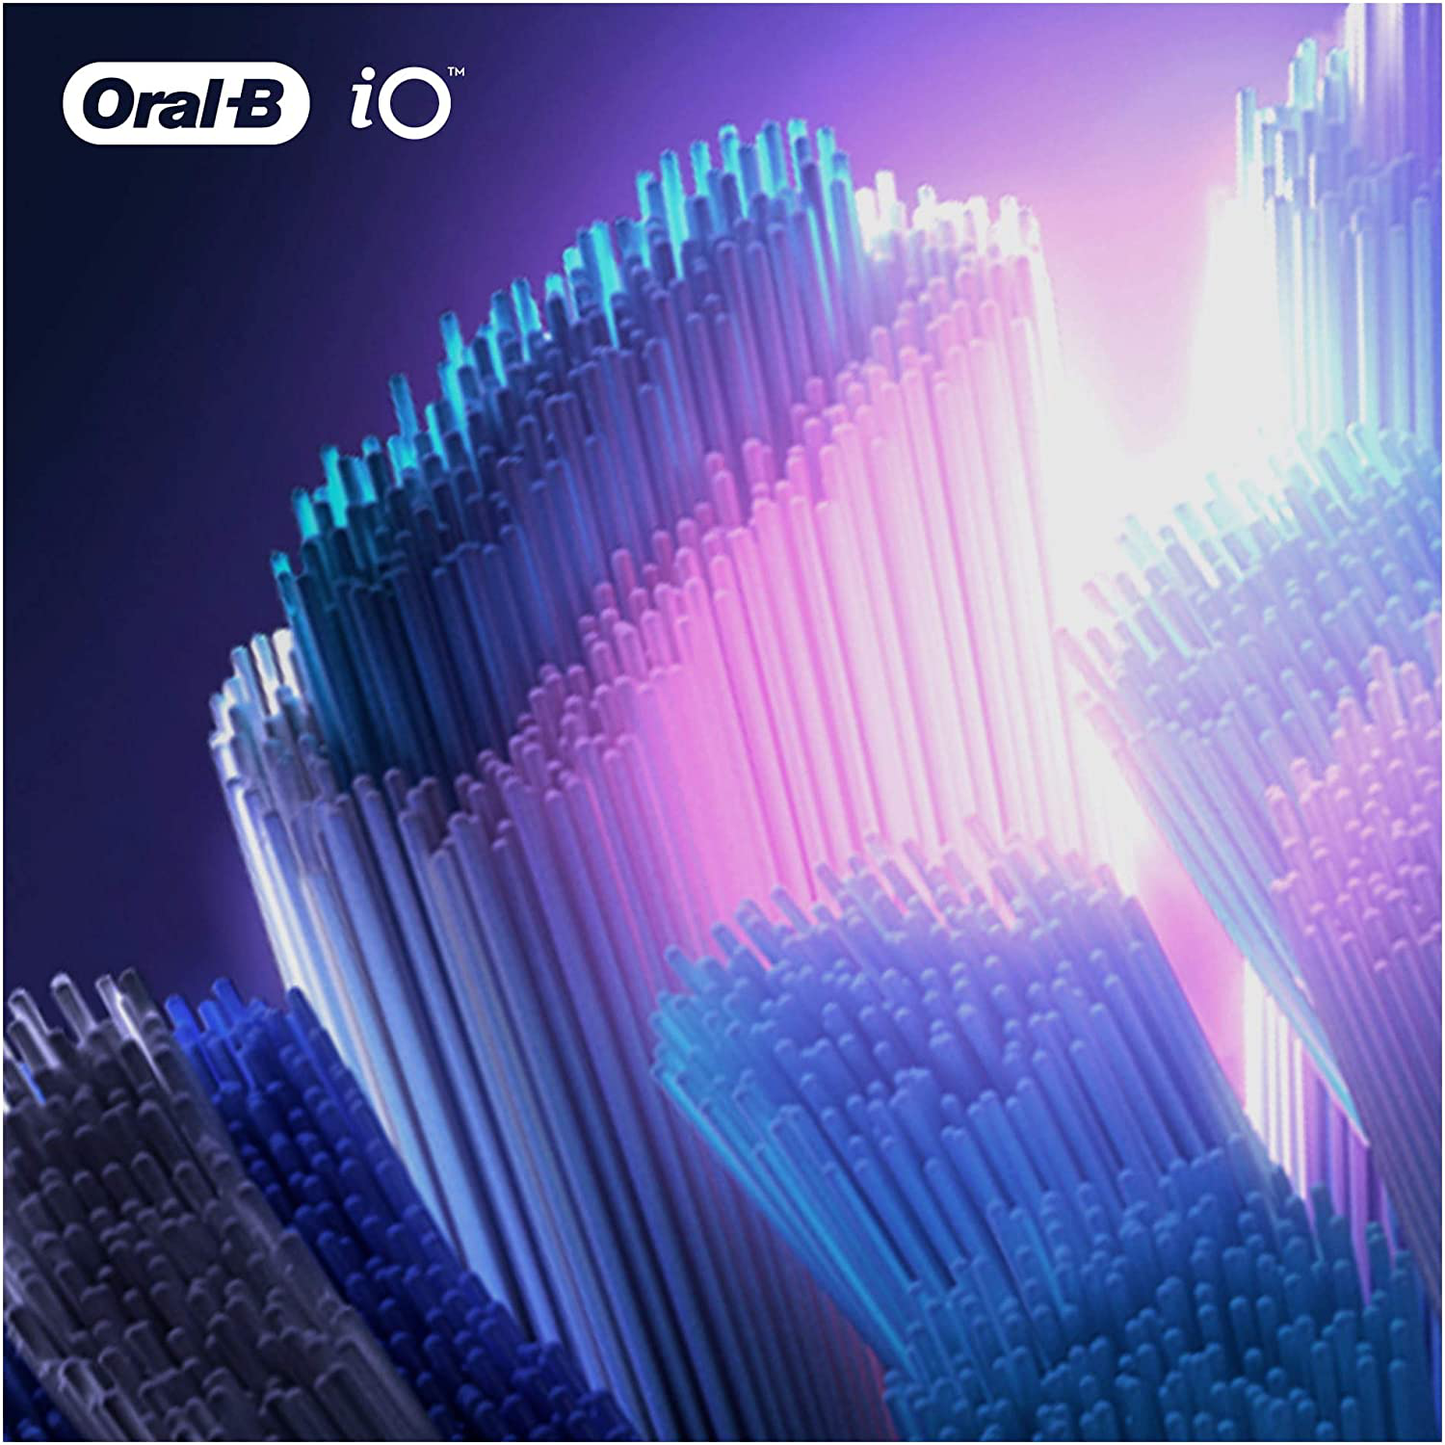 Oral-B iO Ultimate Clean Brush Heads to Make Your Mouth Feel Sensational